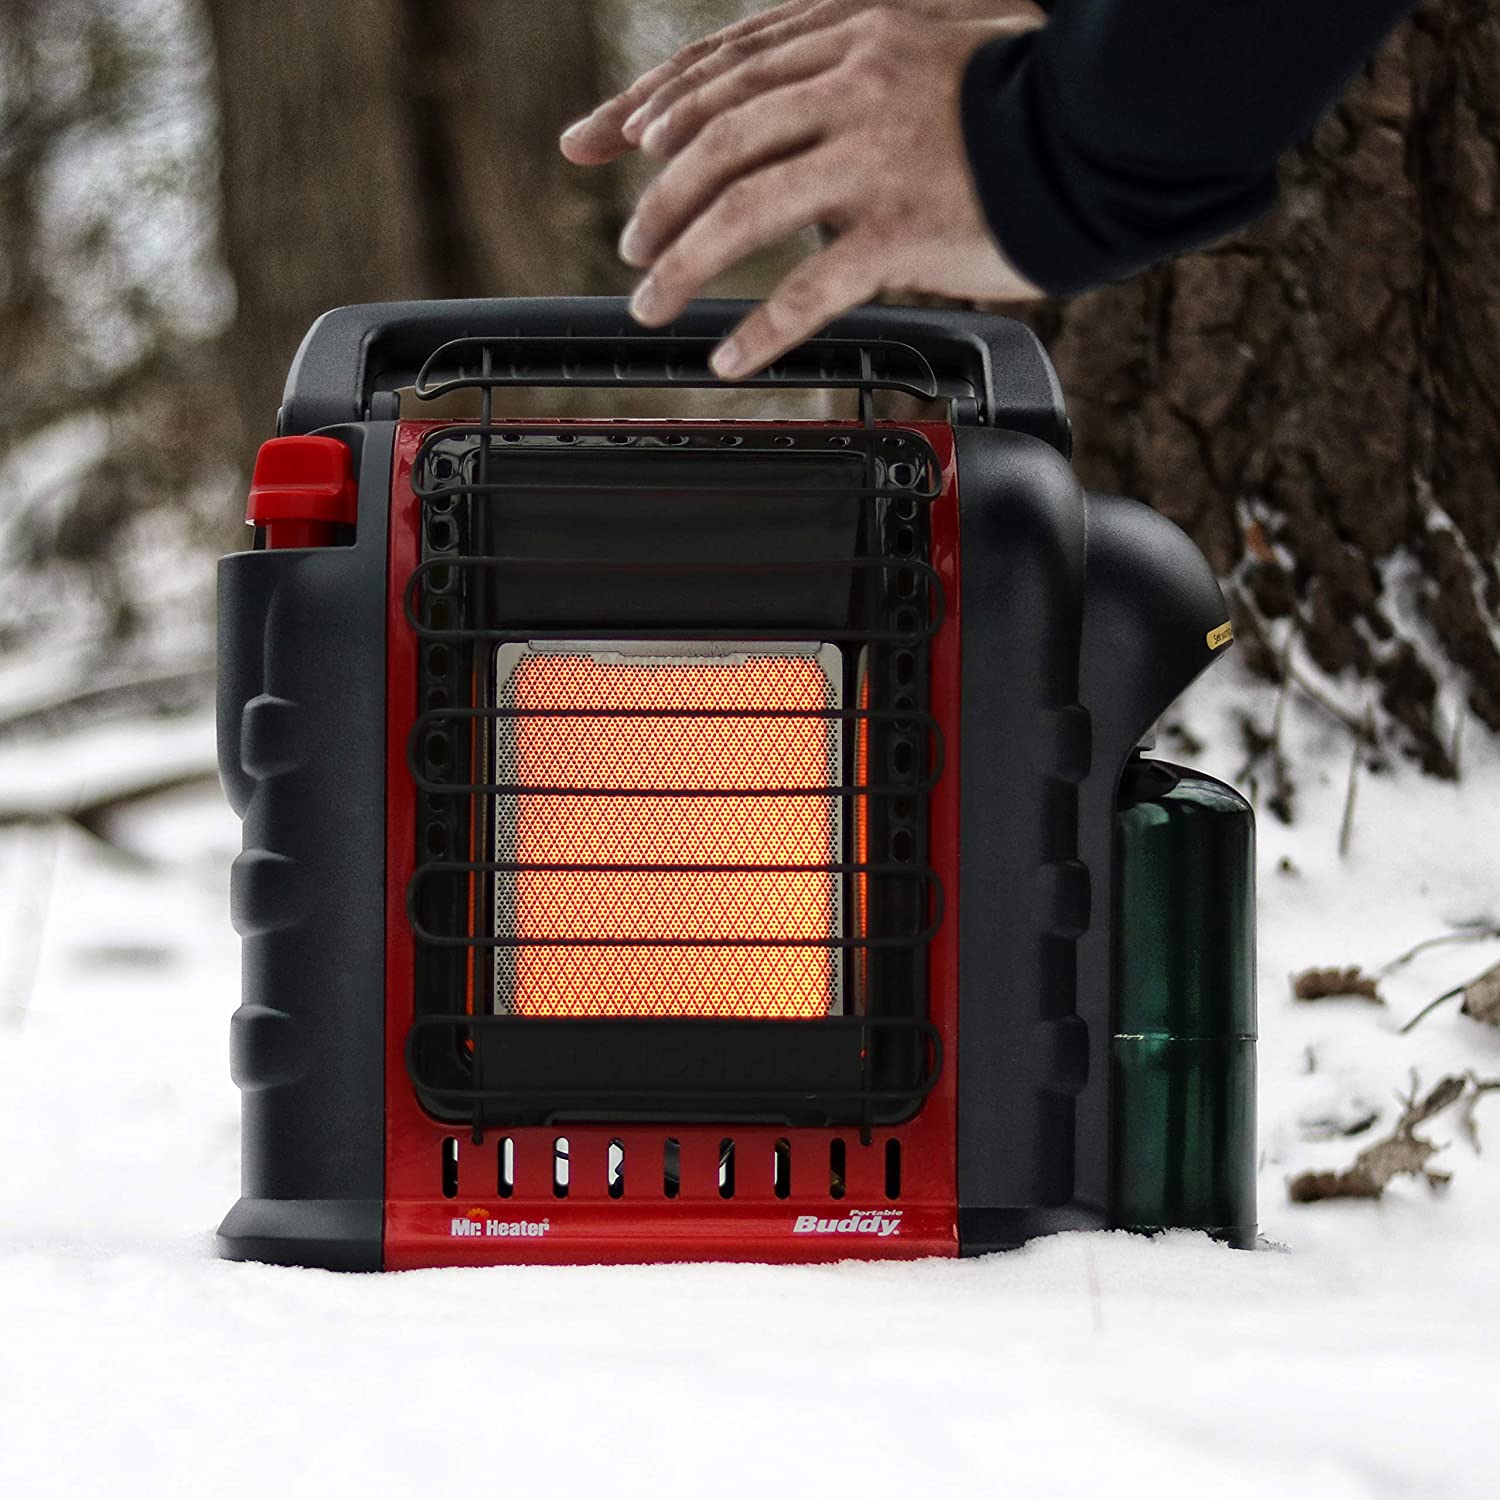 A person is warming their hands next to a propane radiant heater while outdoors in the snow.